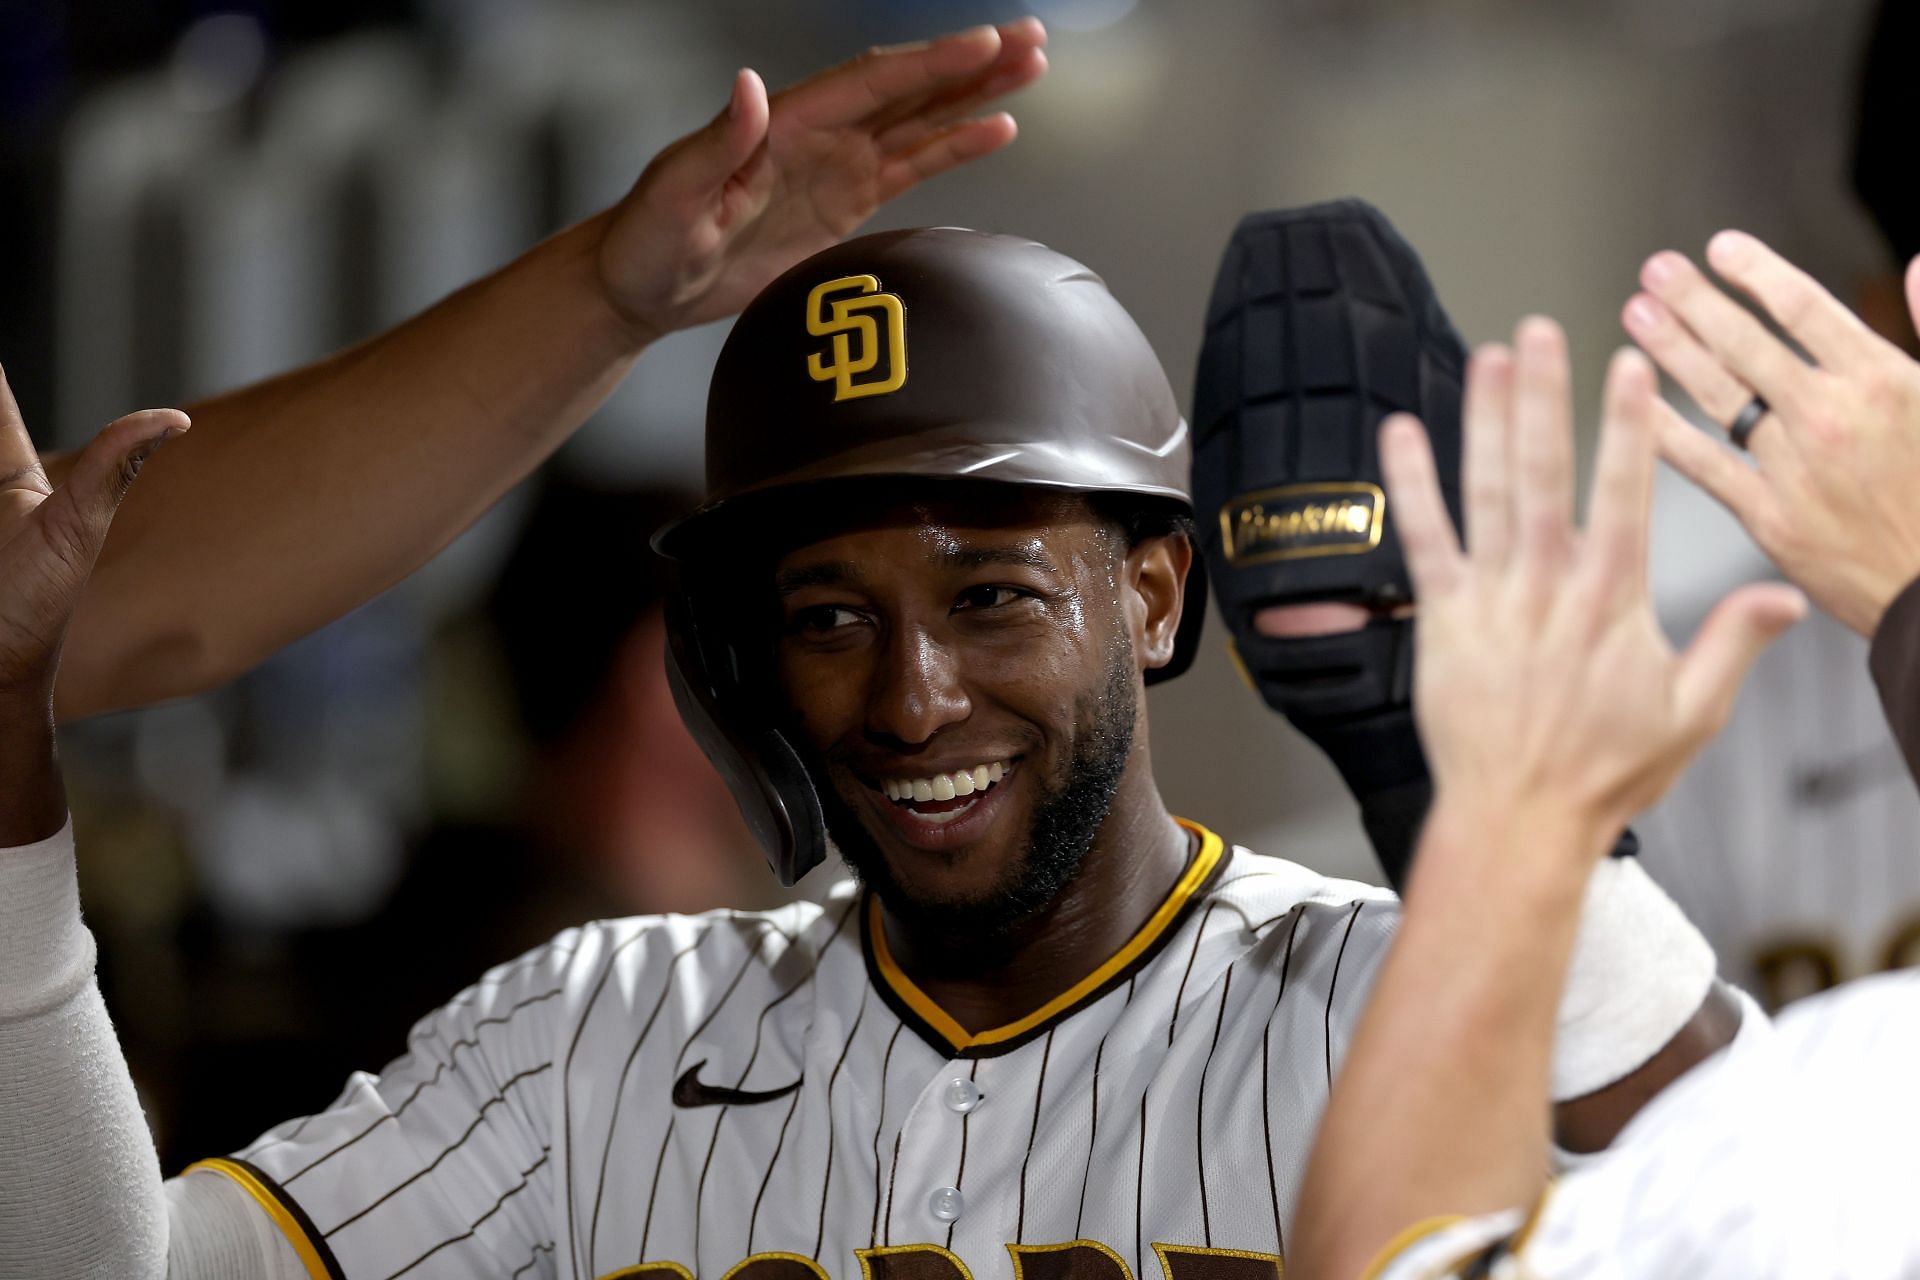 Jurickson Profar is congratulated in the dugout after scoring on an RBI against the San Francisco Giants at PETCO Park